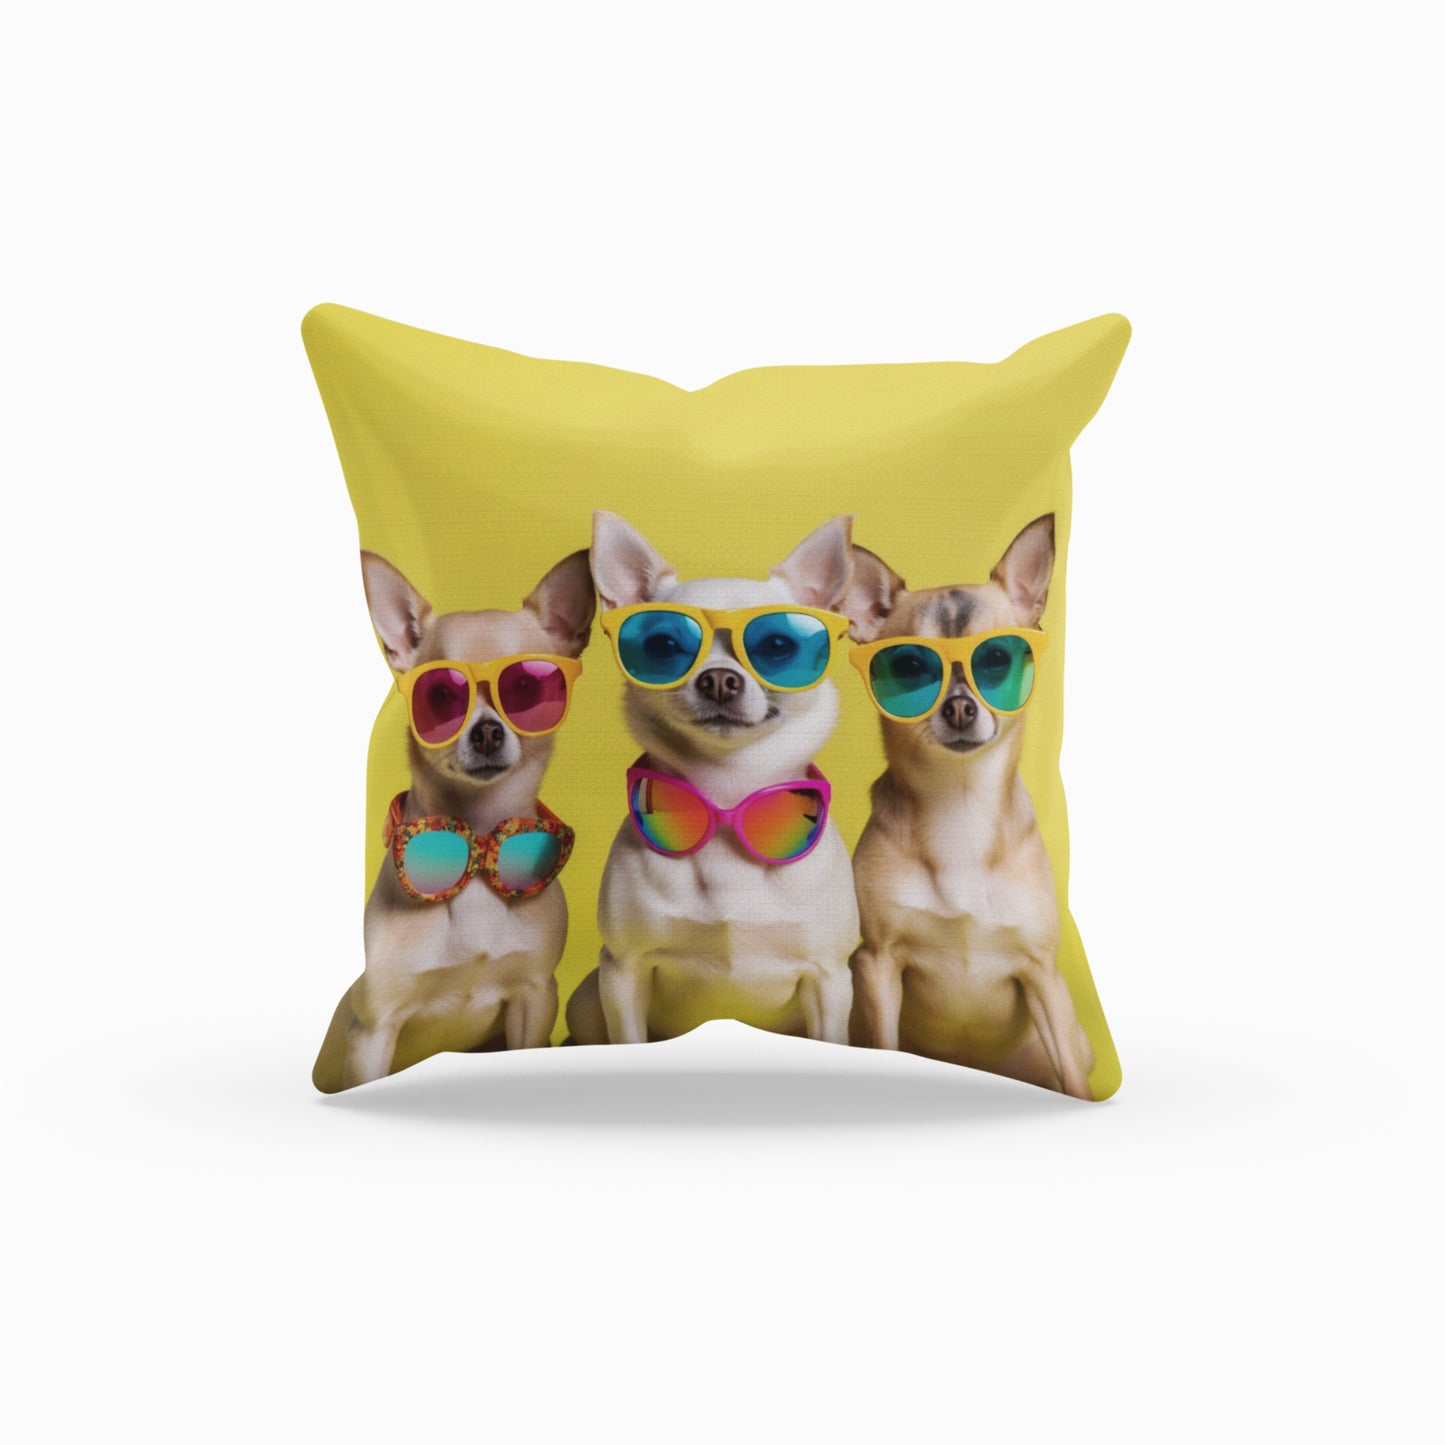 Stylish Printed Throw Pillow with Chihuahua